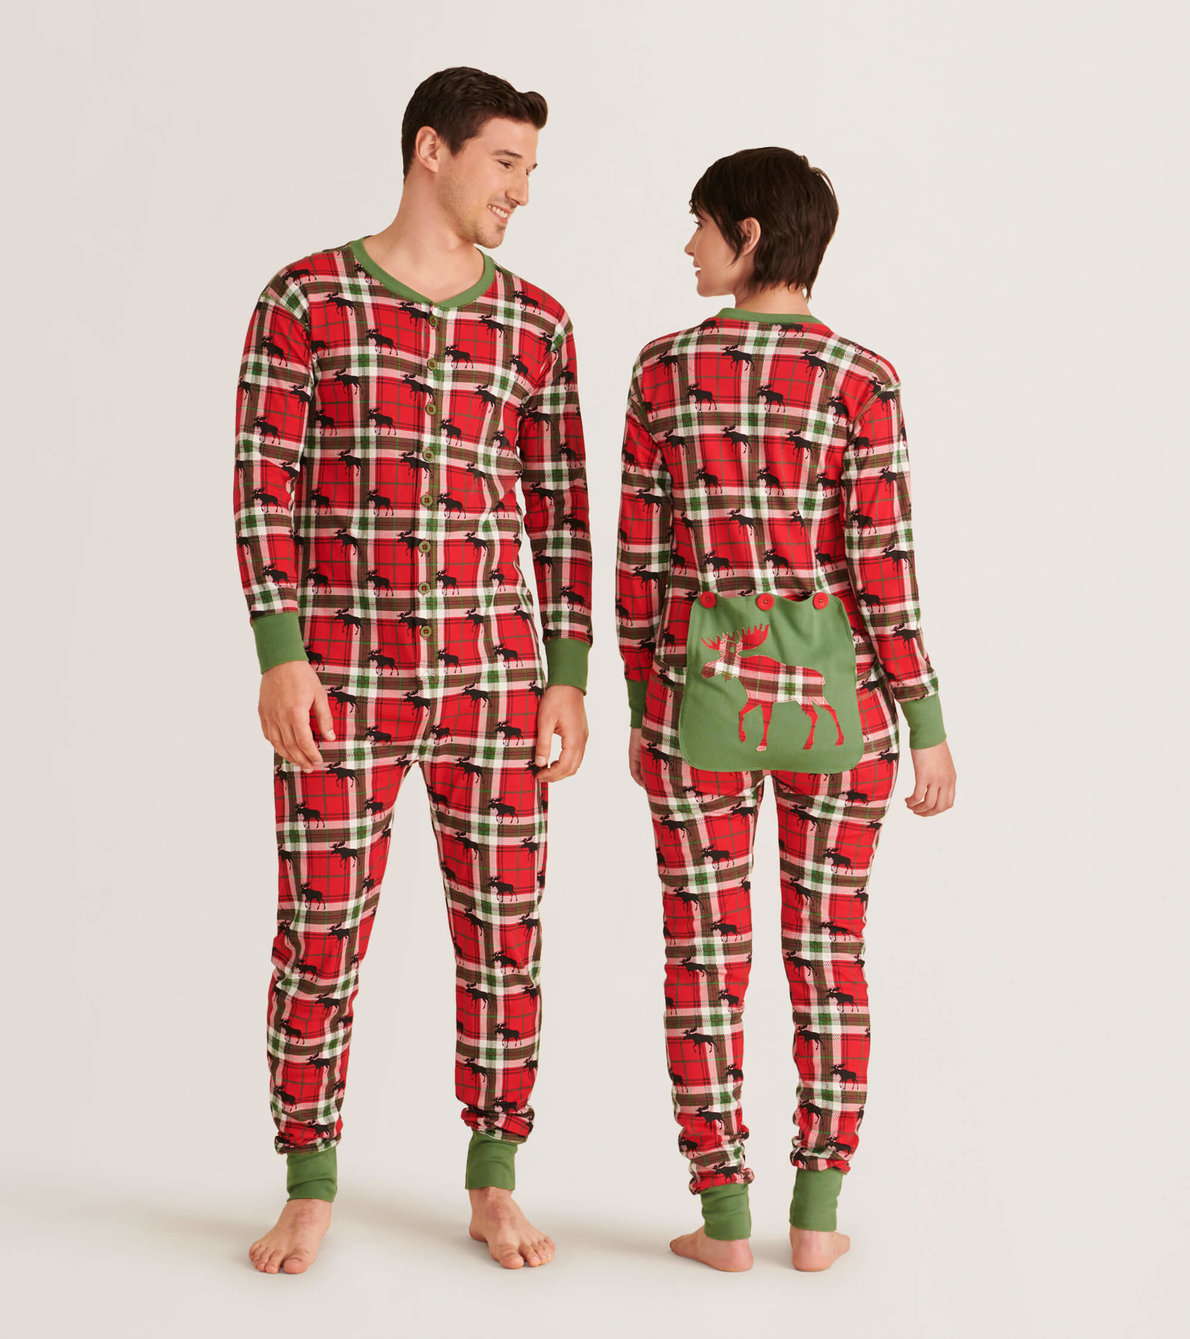 View larger image of Holiday Moose on Plaid Adult Union Suit